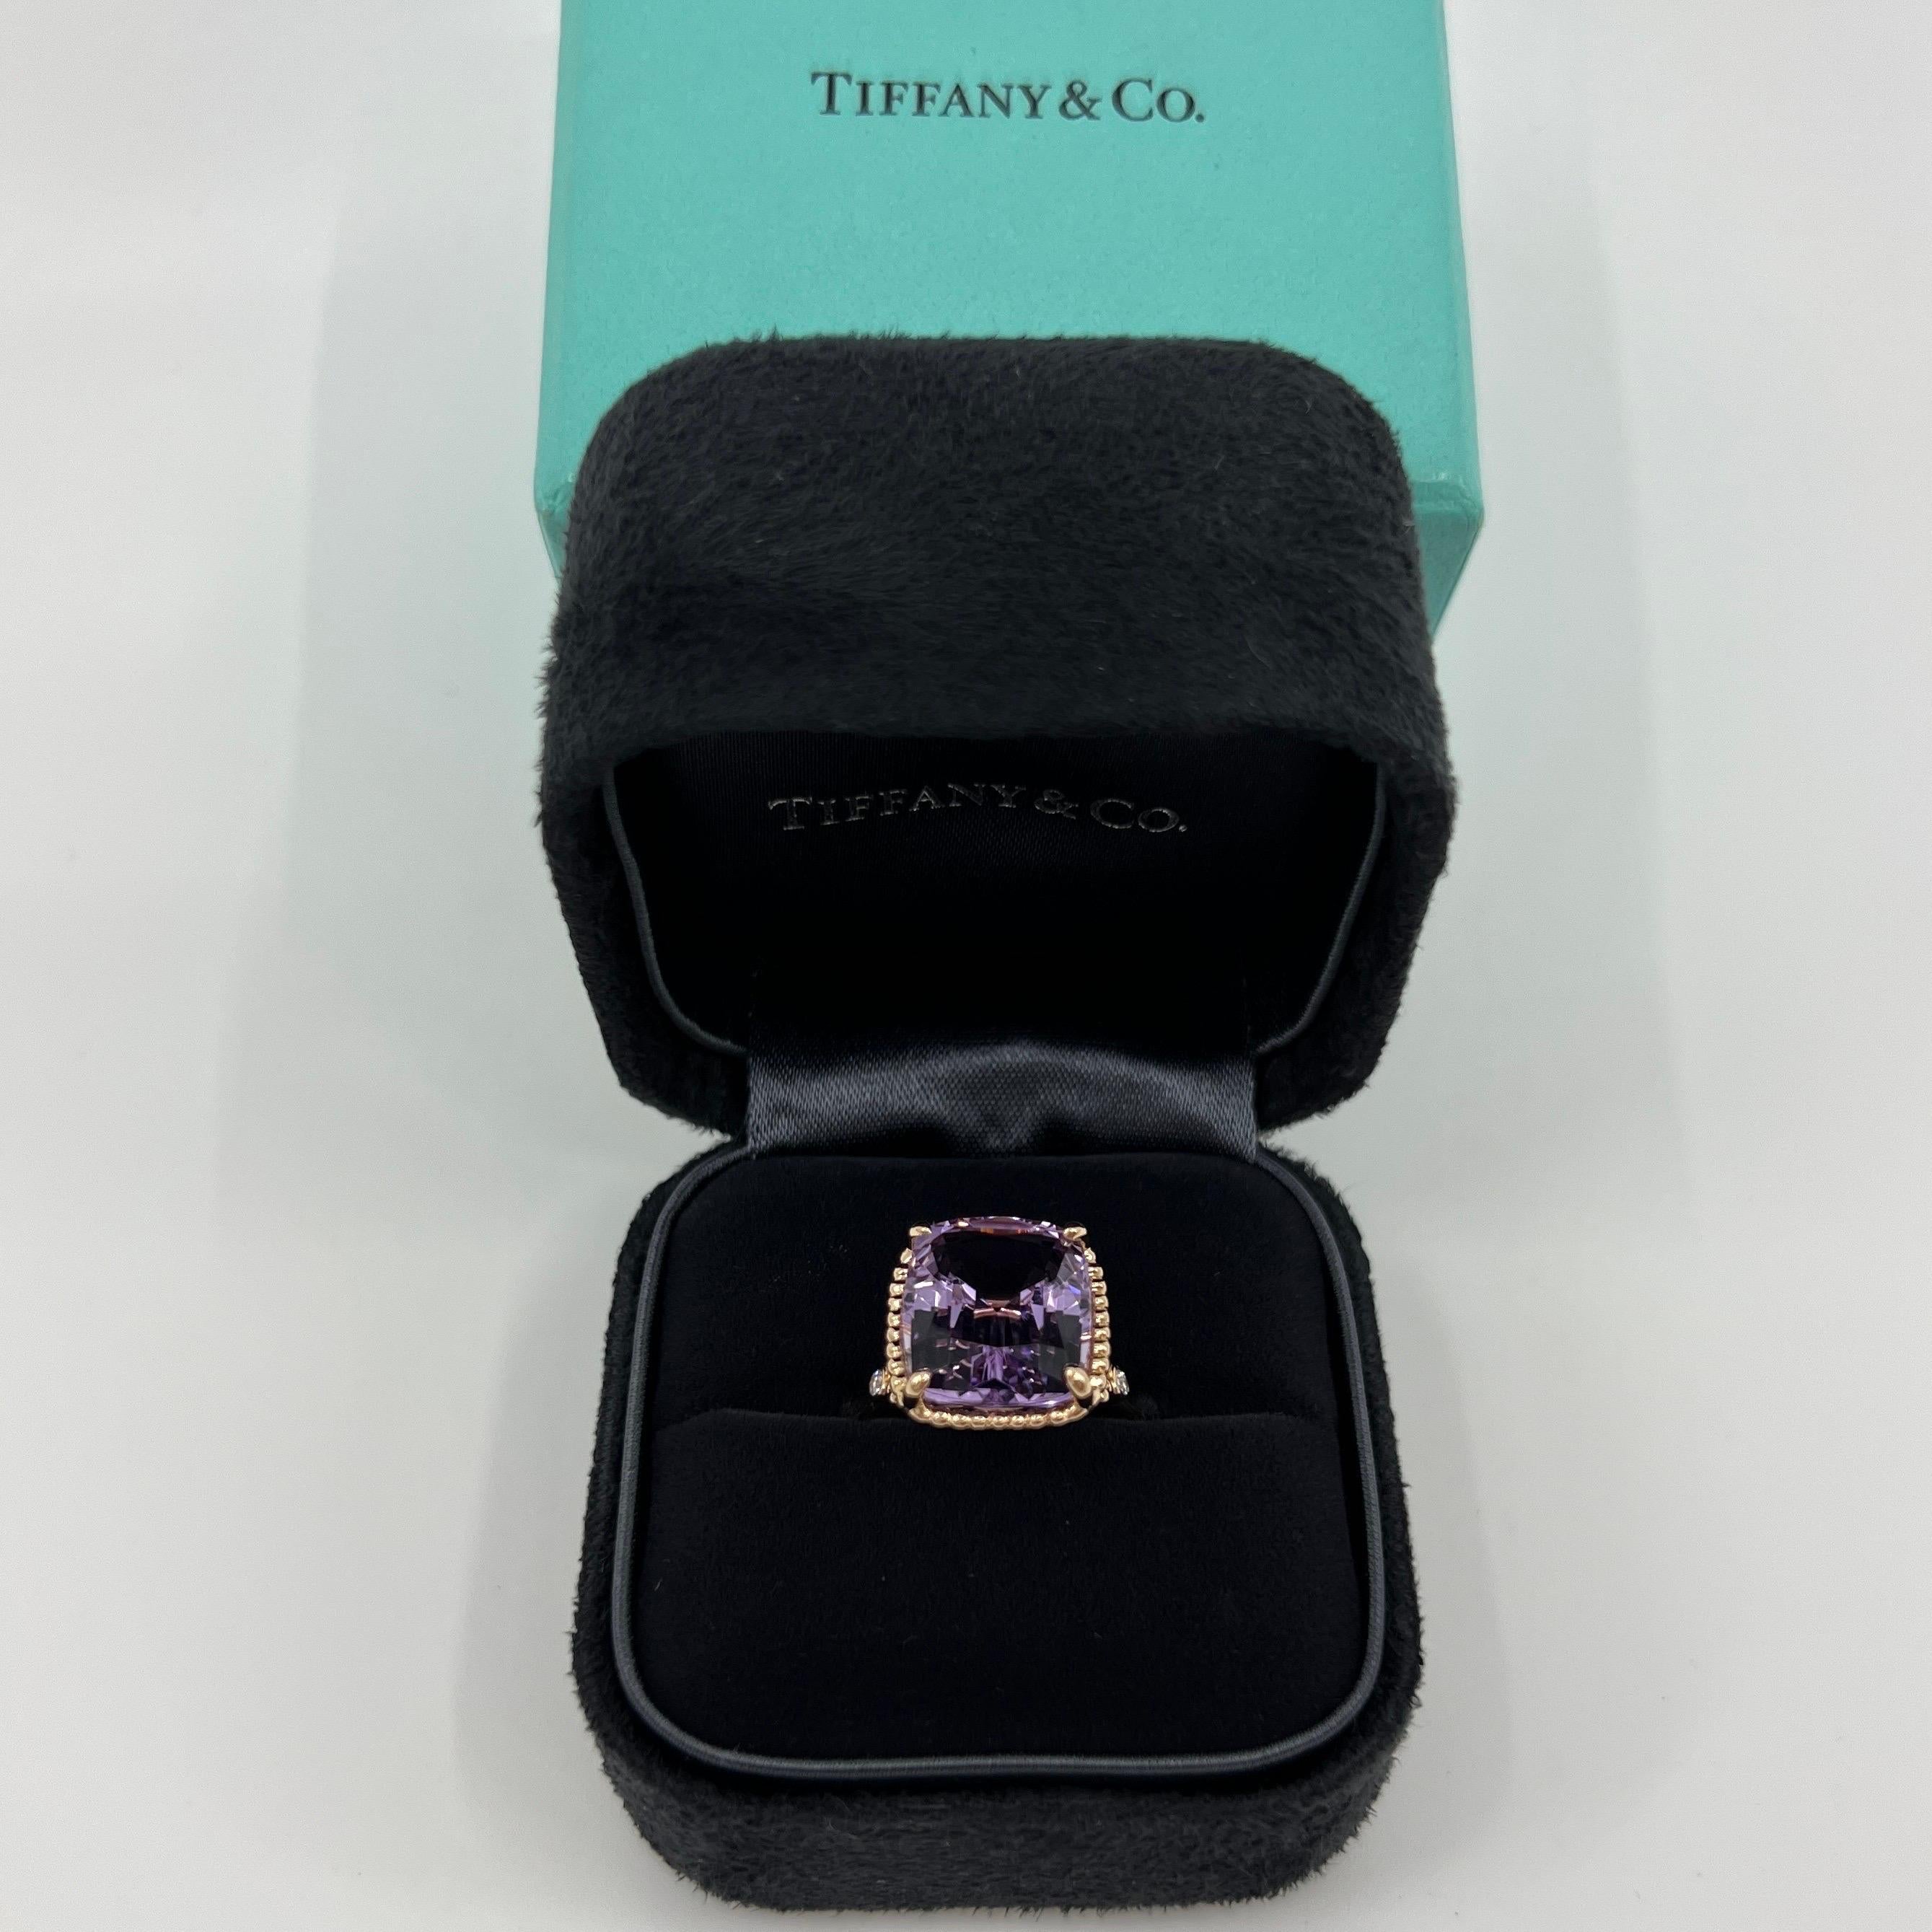 Rare Tiffany & Co. Amethyst And Diamond 'Sparkler' Cushion Cut 18k Rose Gold Ring.

A beautiful and rare cushion cut purple amethyst & diamond 'sparkler' ring from Tiffany & Co.

Fine jewellery houses like Tiffany only use the finest gemstone in